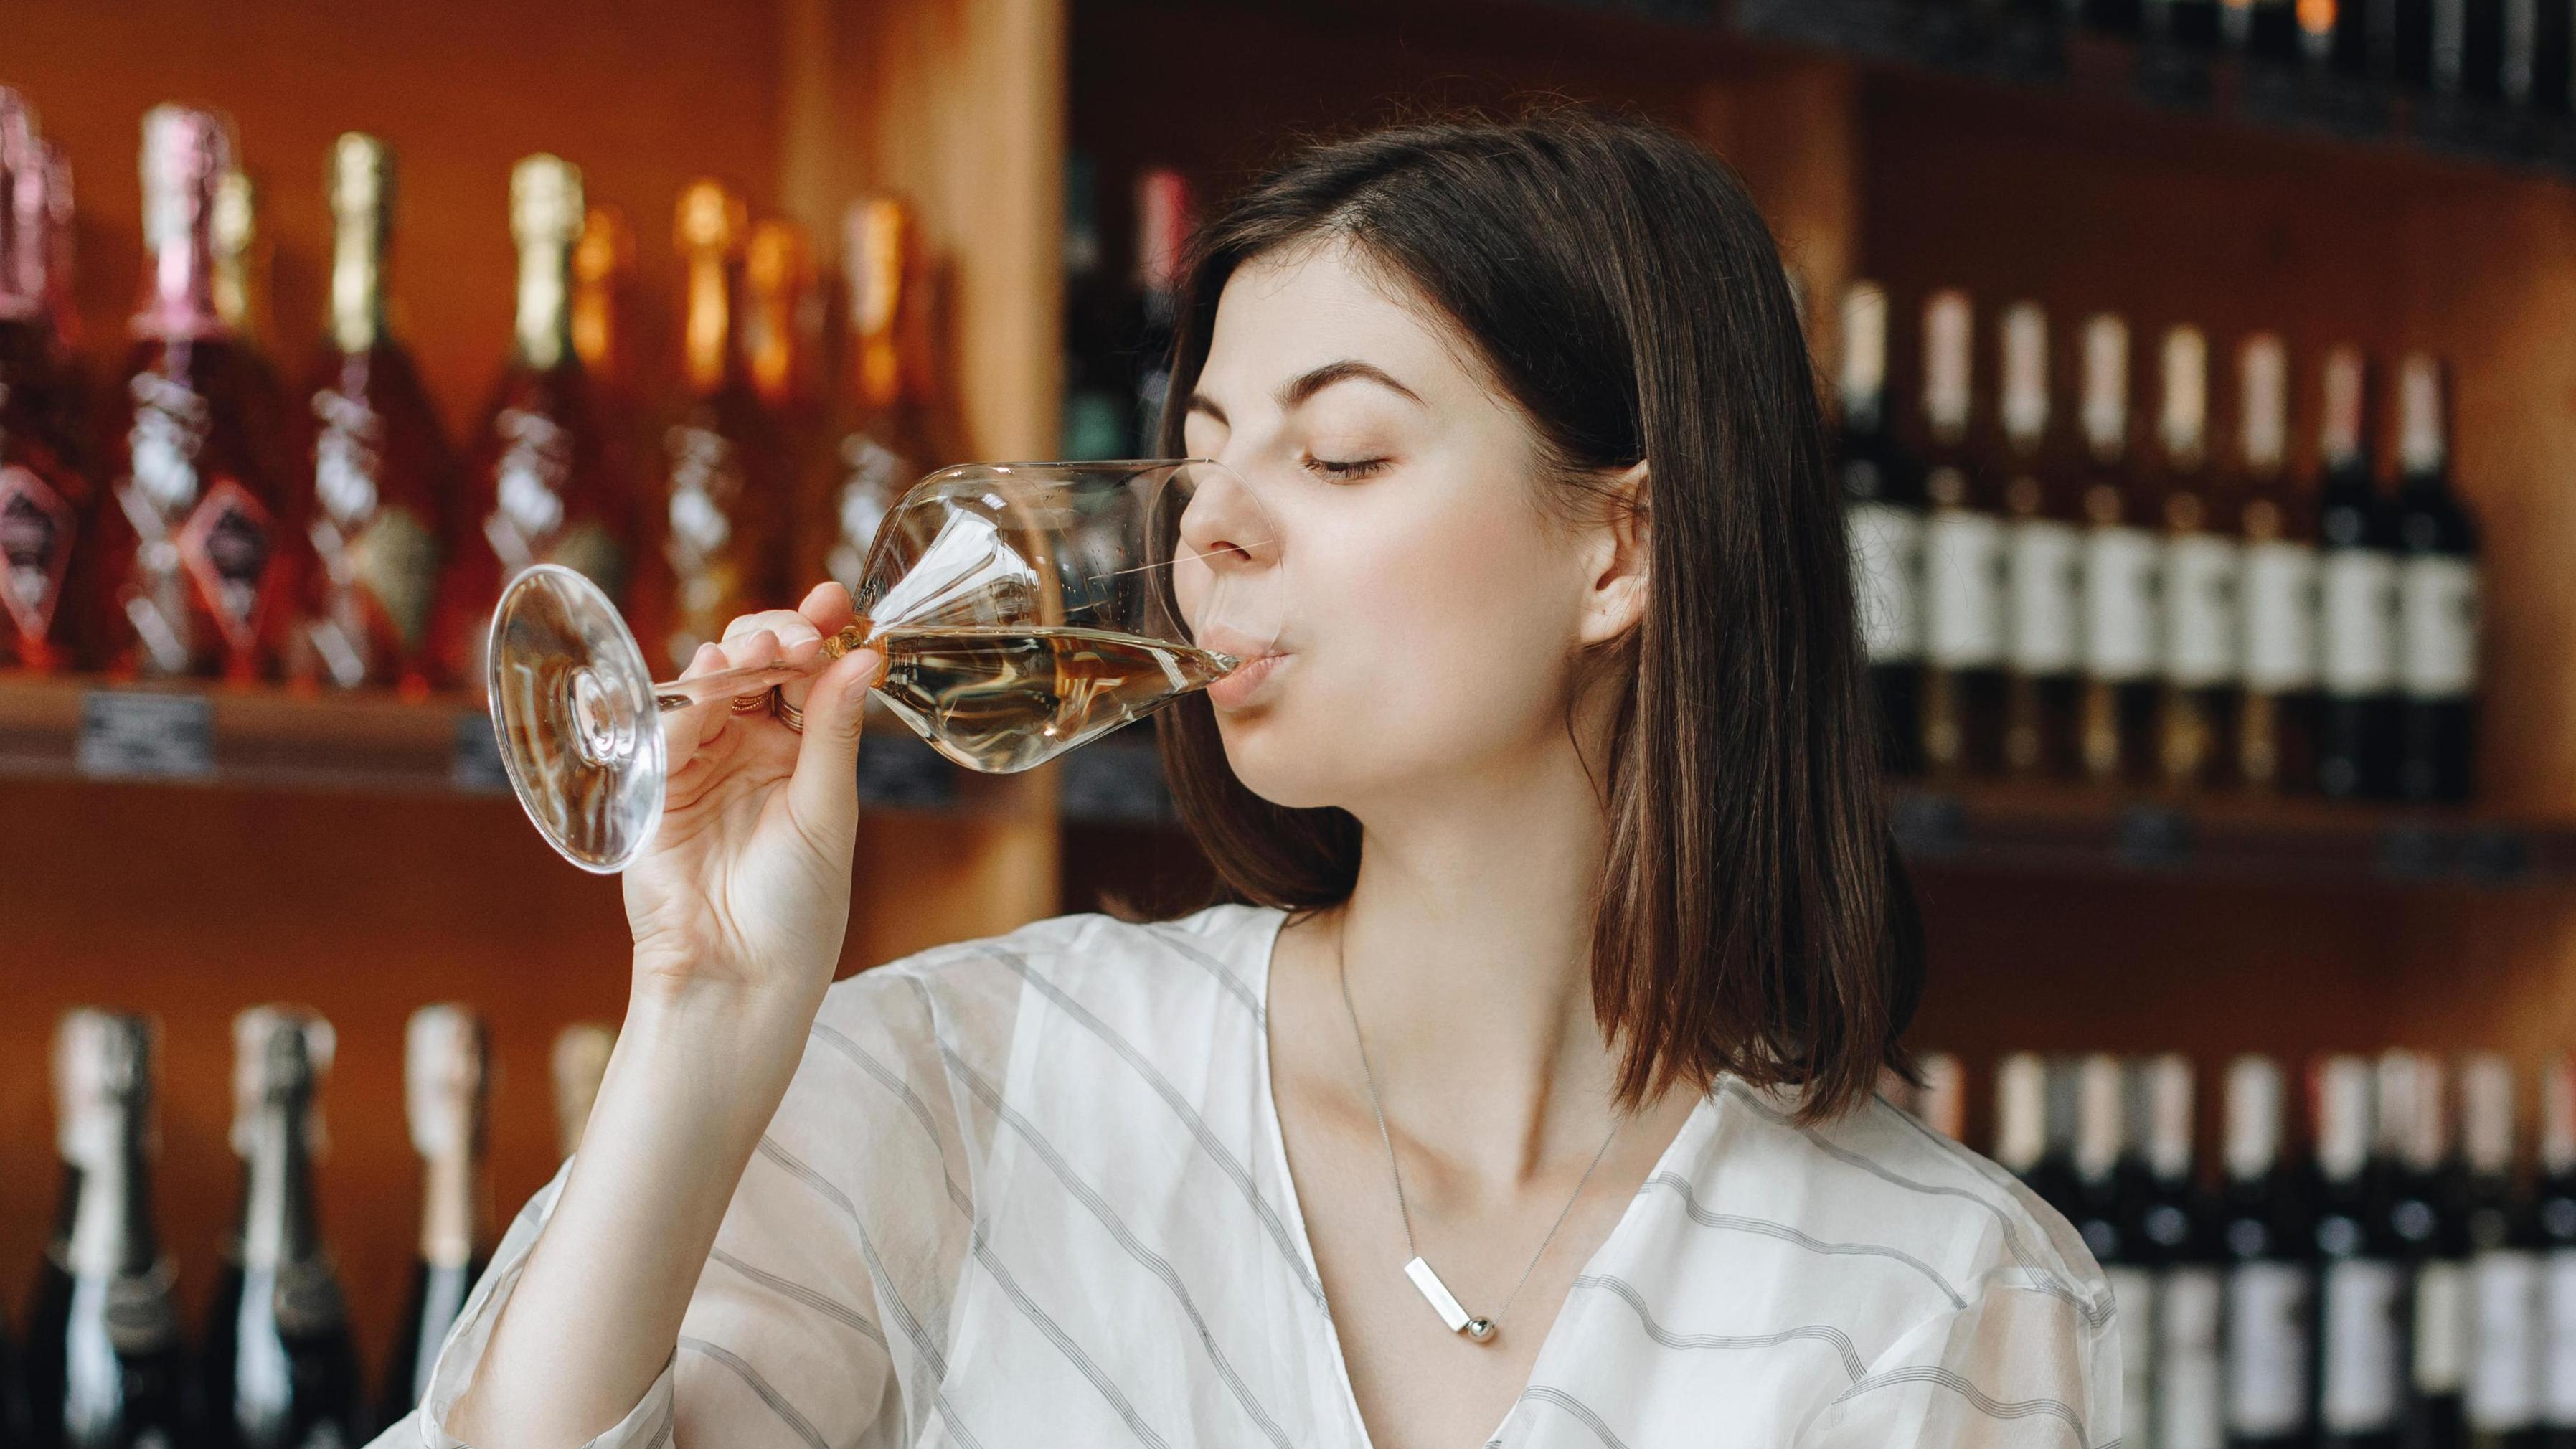 Alcohol raises blood pressure and increases inflammation, even in young adults